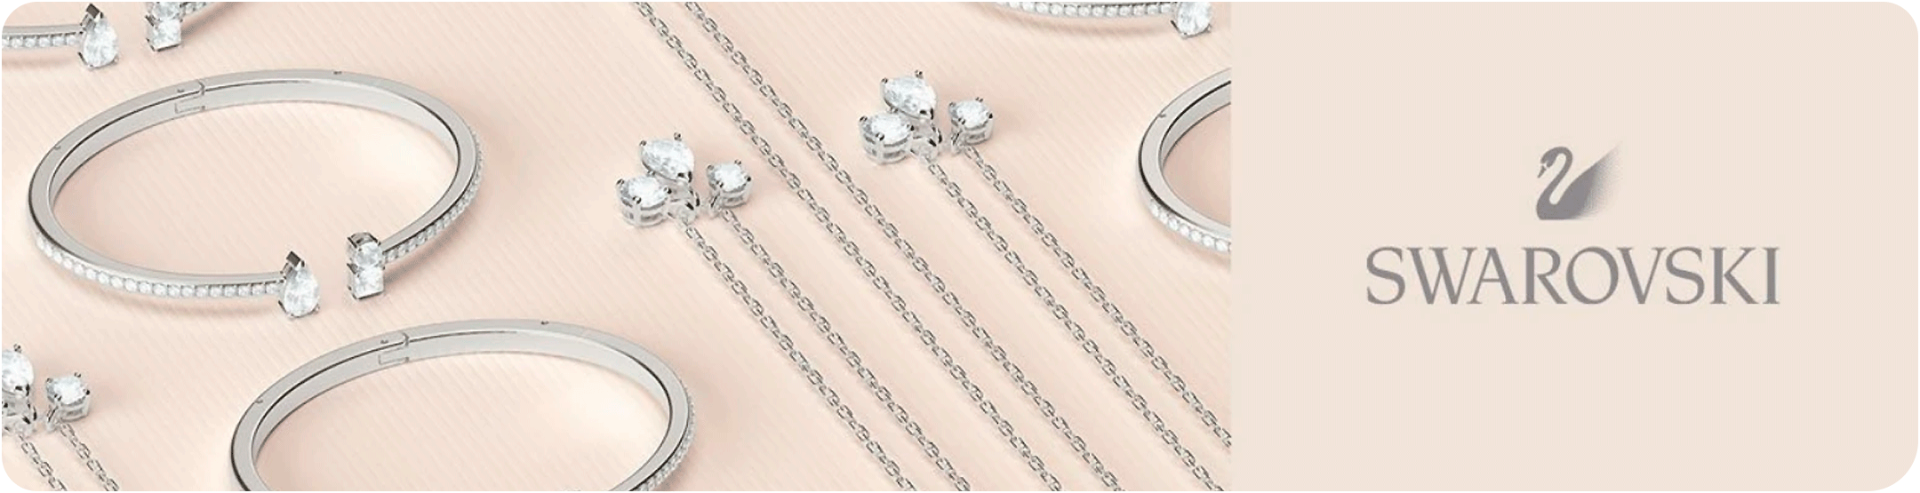 A collection of silver Swarovski jewellery including bracelets and necklaces with the Swarovski swan logo